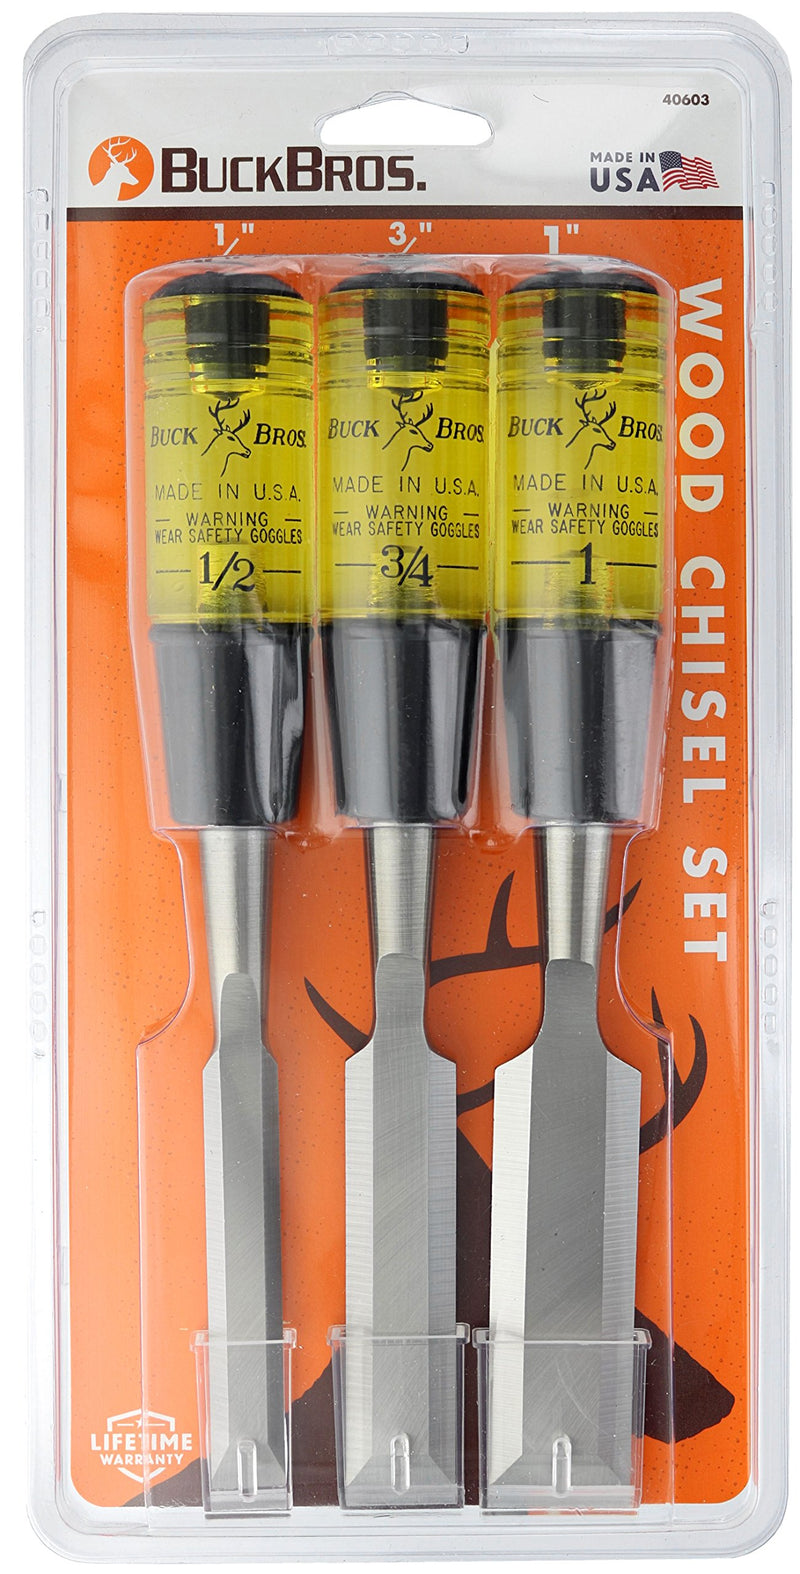 Buck Brothers 1201030 3-Piece Professional Wood Chisel Set, Acetate Handles, 1/2 Inch, 3/4 Inch, 1 Inch Chisels, Chisel Set Woodworking, Carving Wood - NewNest Australia